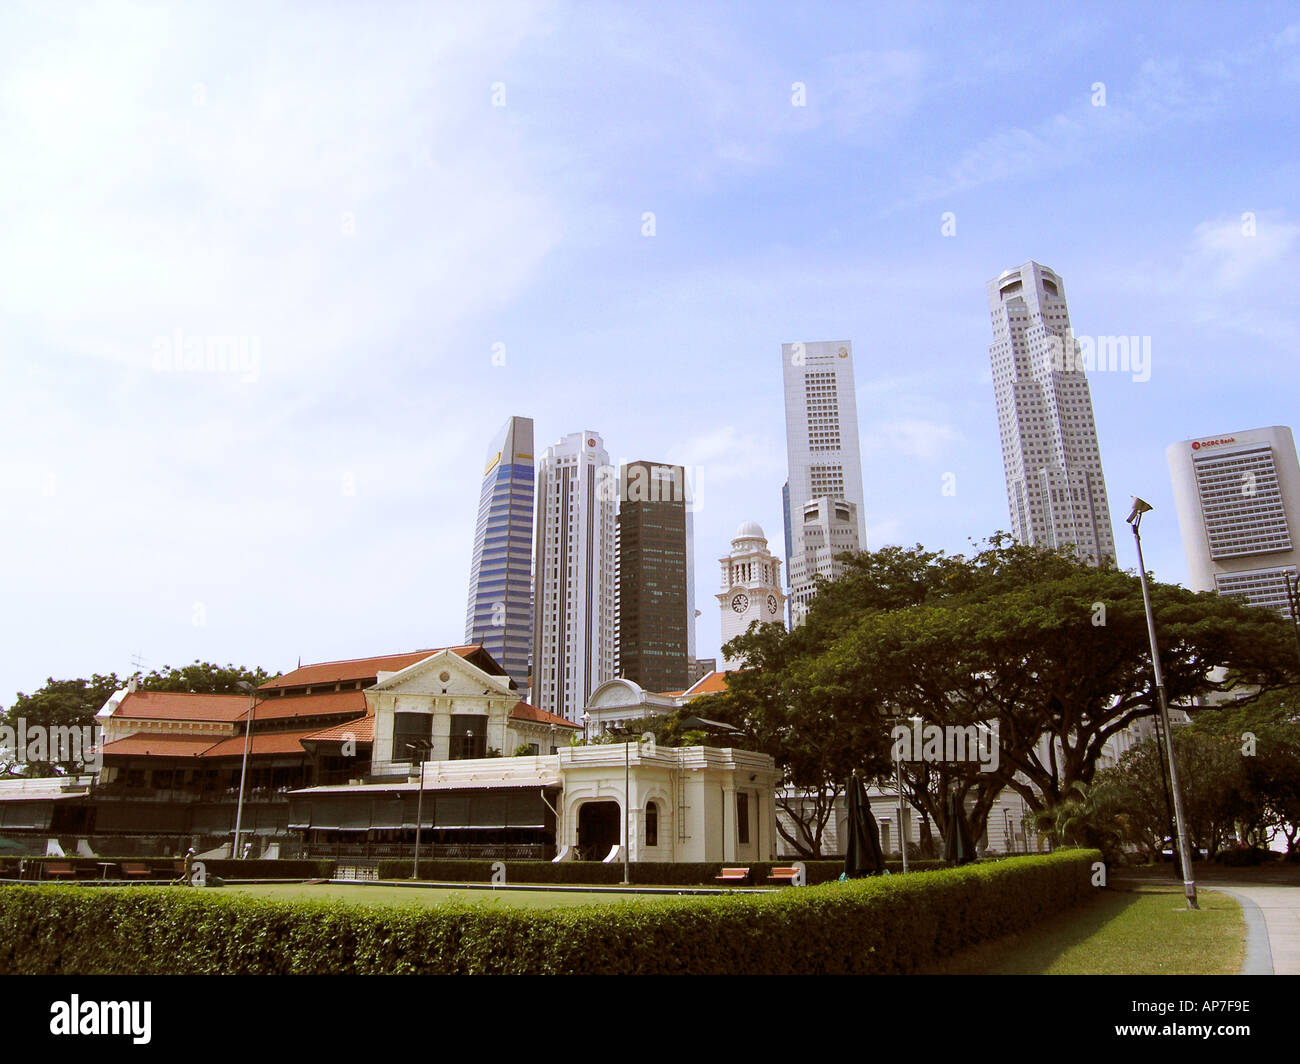 View of old colonial buildings against modern skyscrapers in Singapore Stock Photo